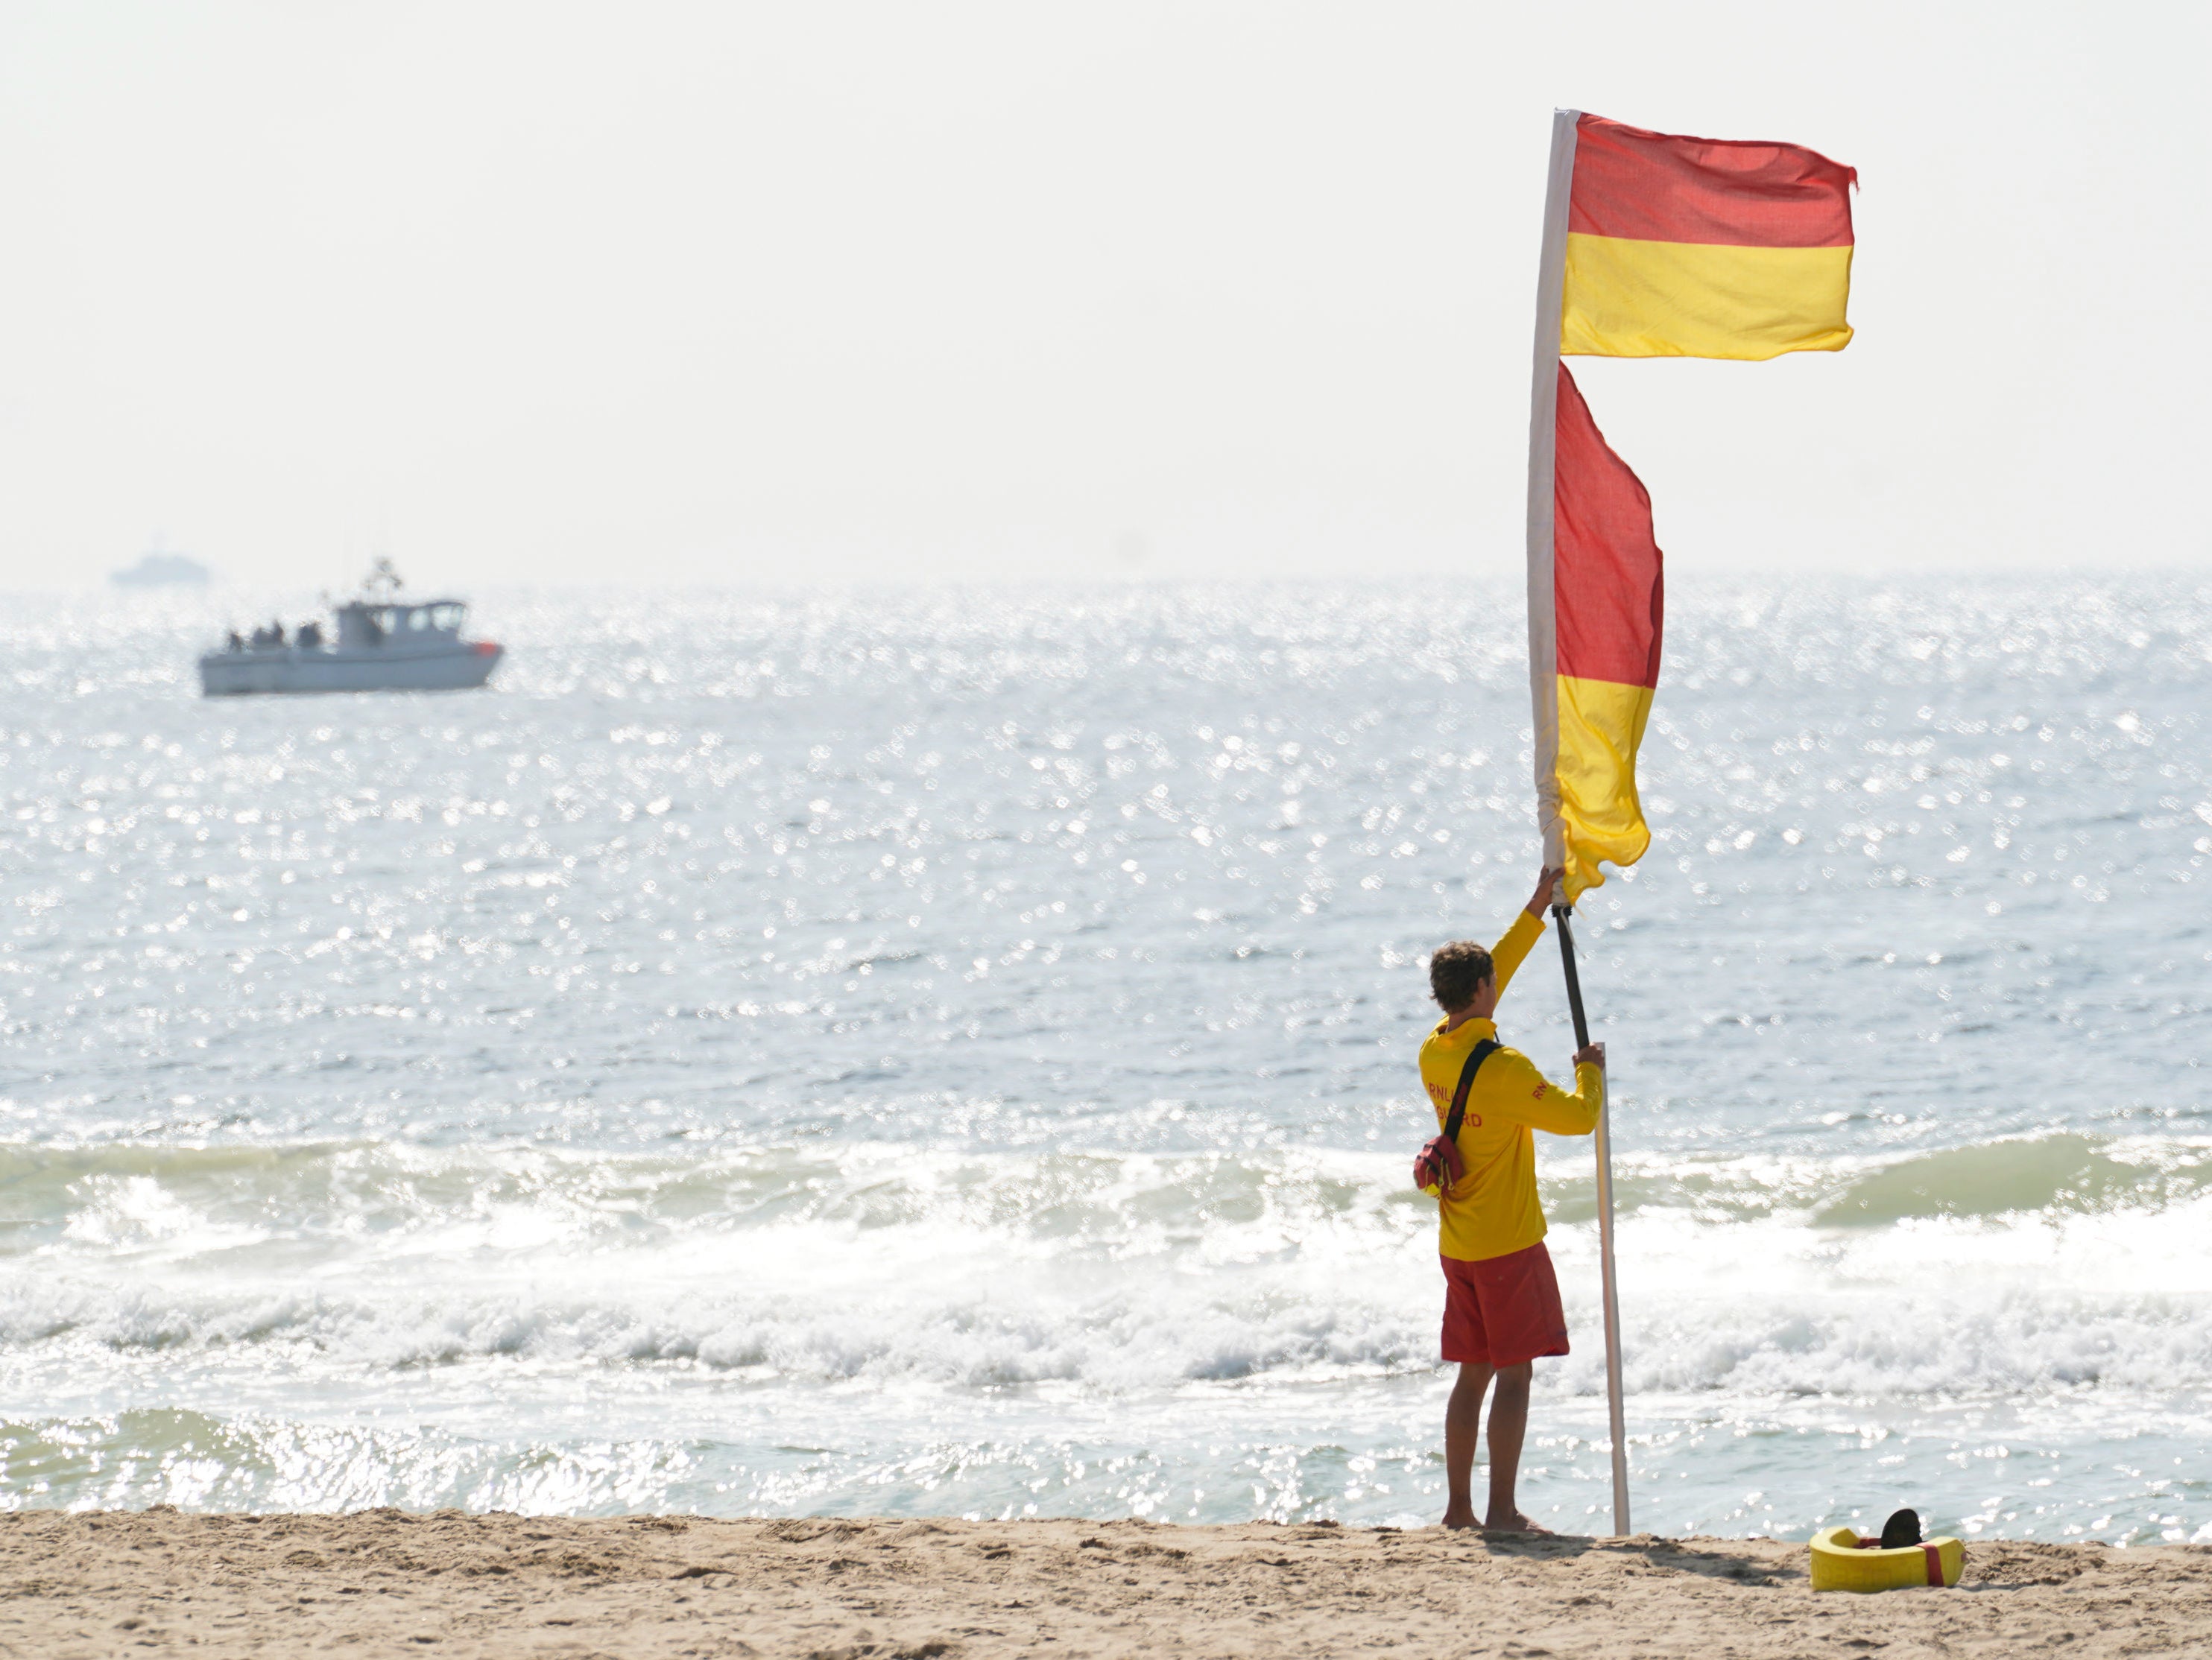 RNLI lifeguards put up flags on the beach